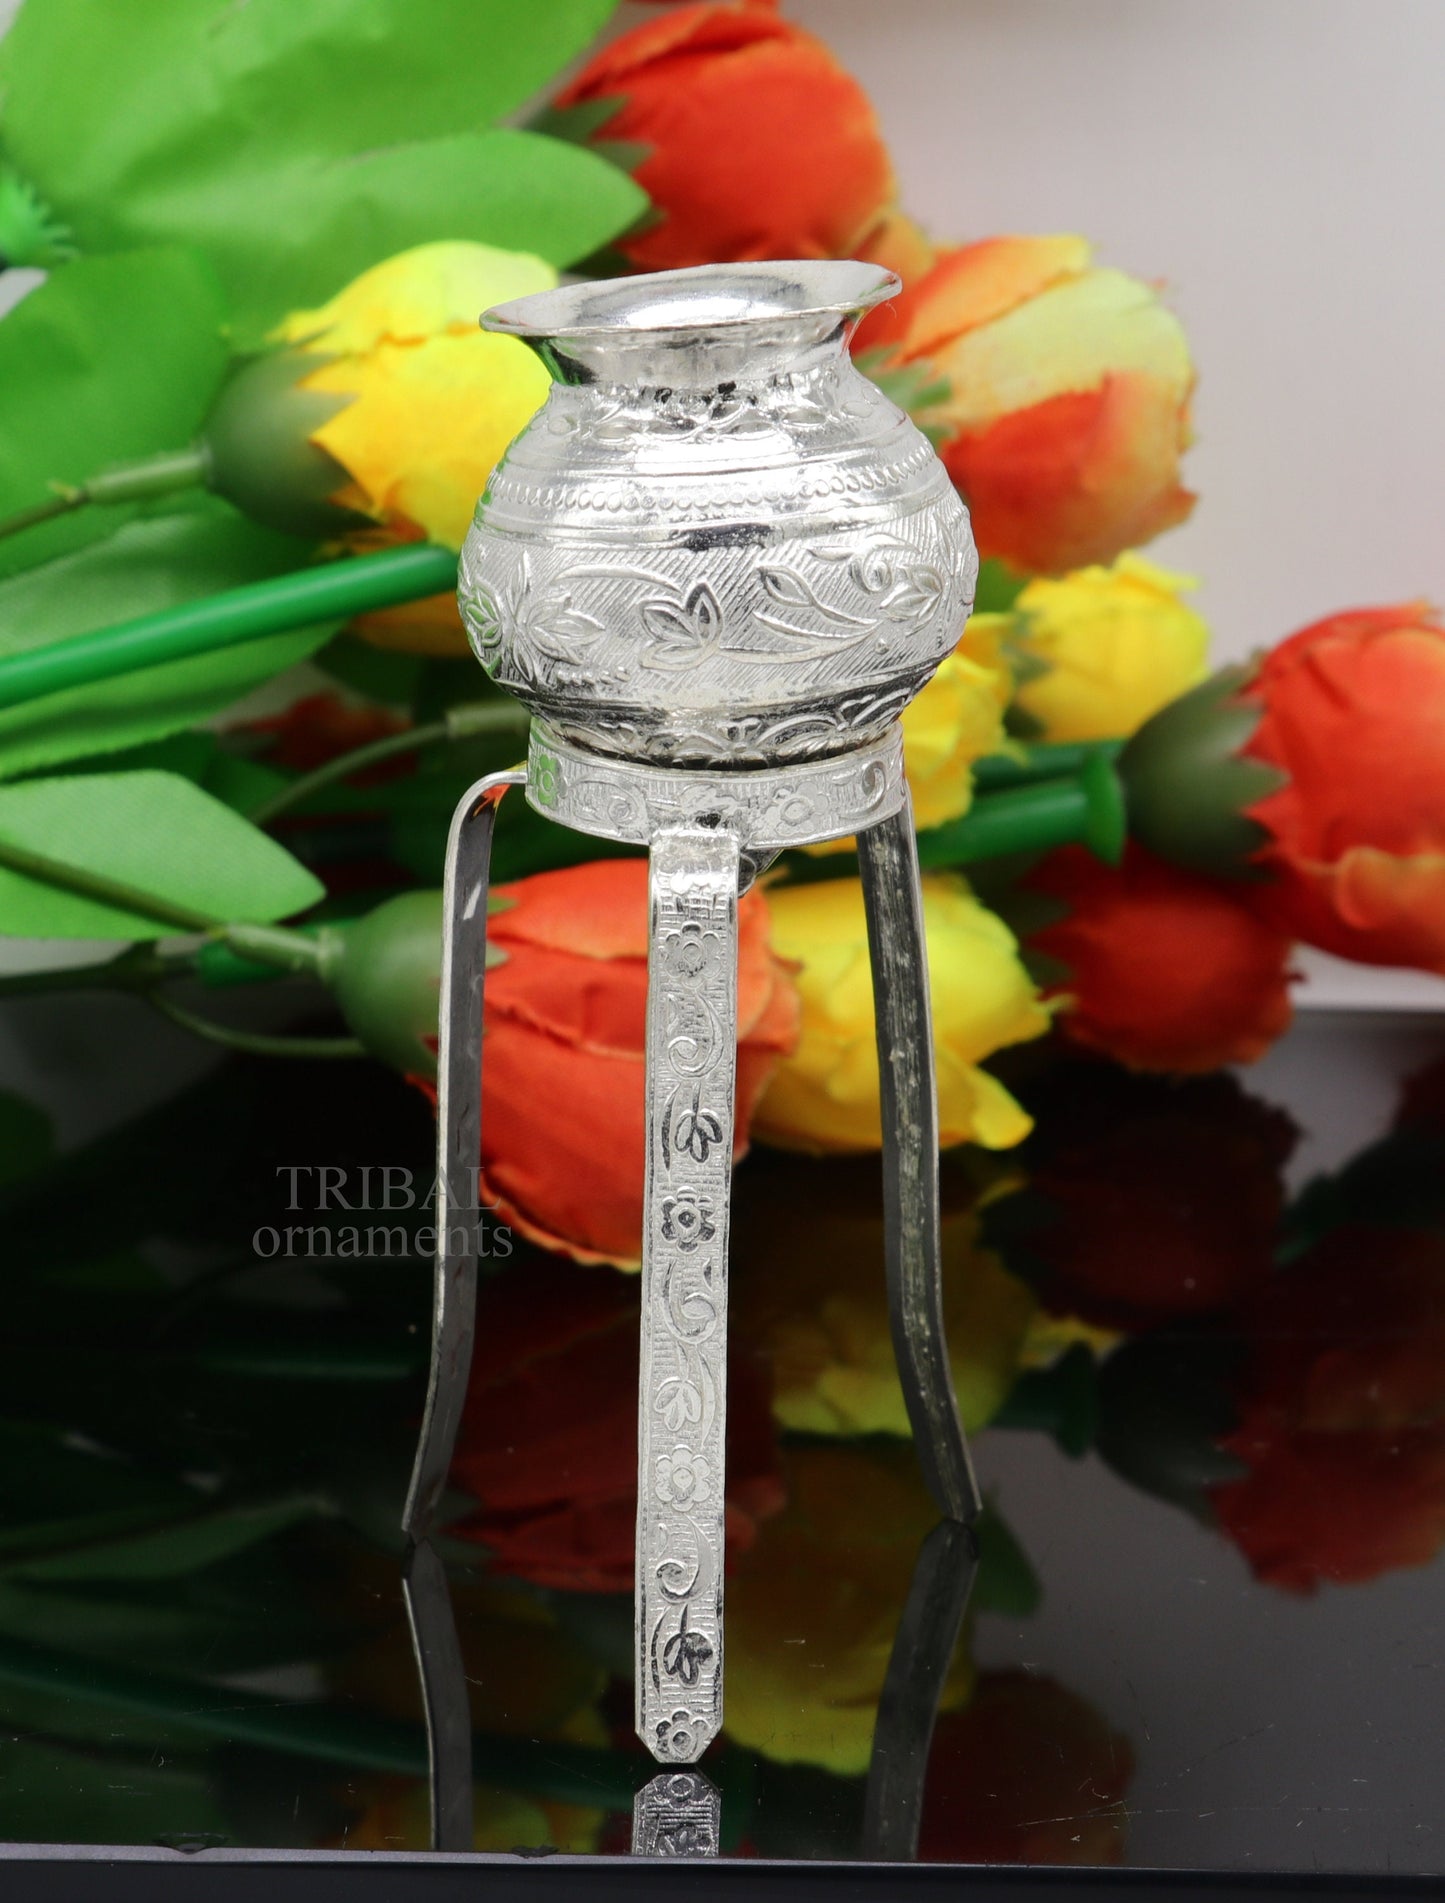 925 sterling silver handmade God shiva lingam water flow pot or puja kalas for Abhishek of lingam, best worshipping article from india su735 - TRIBAL ORNAMENTS